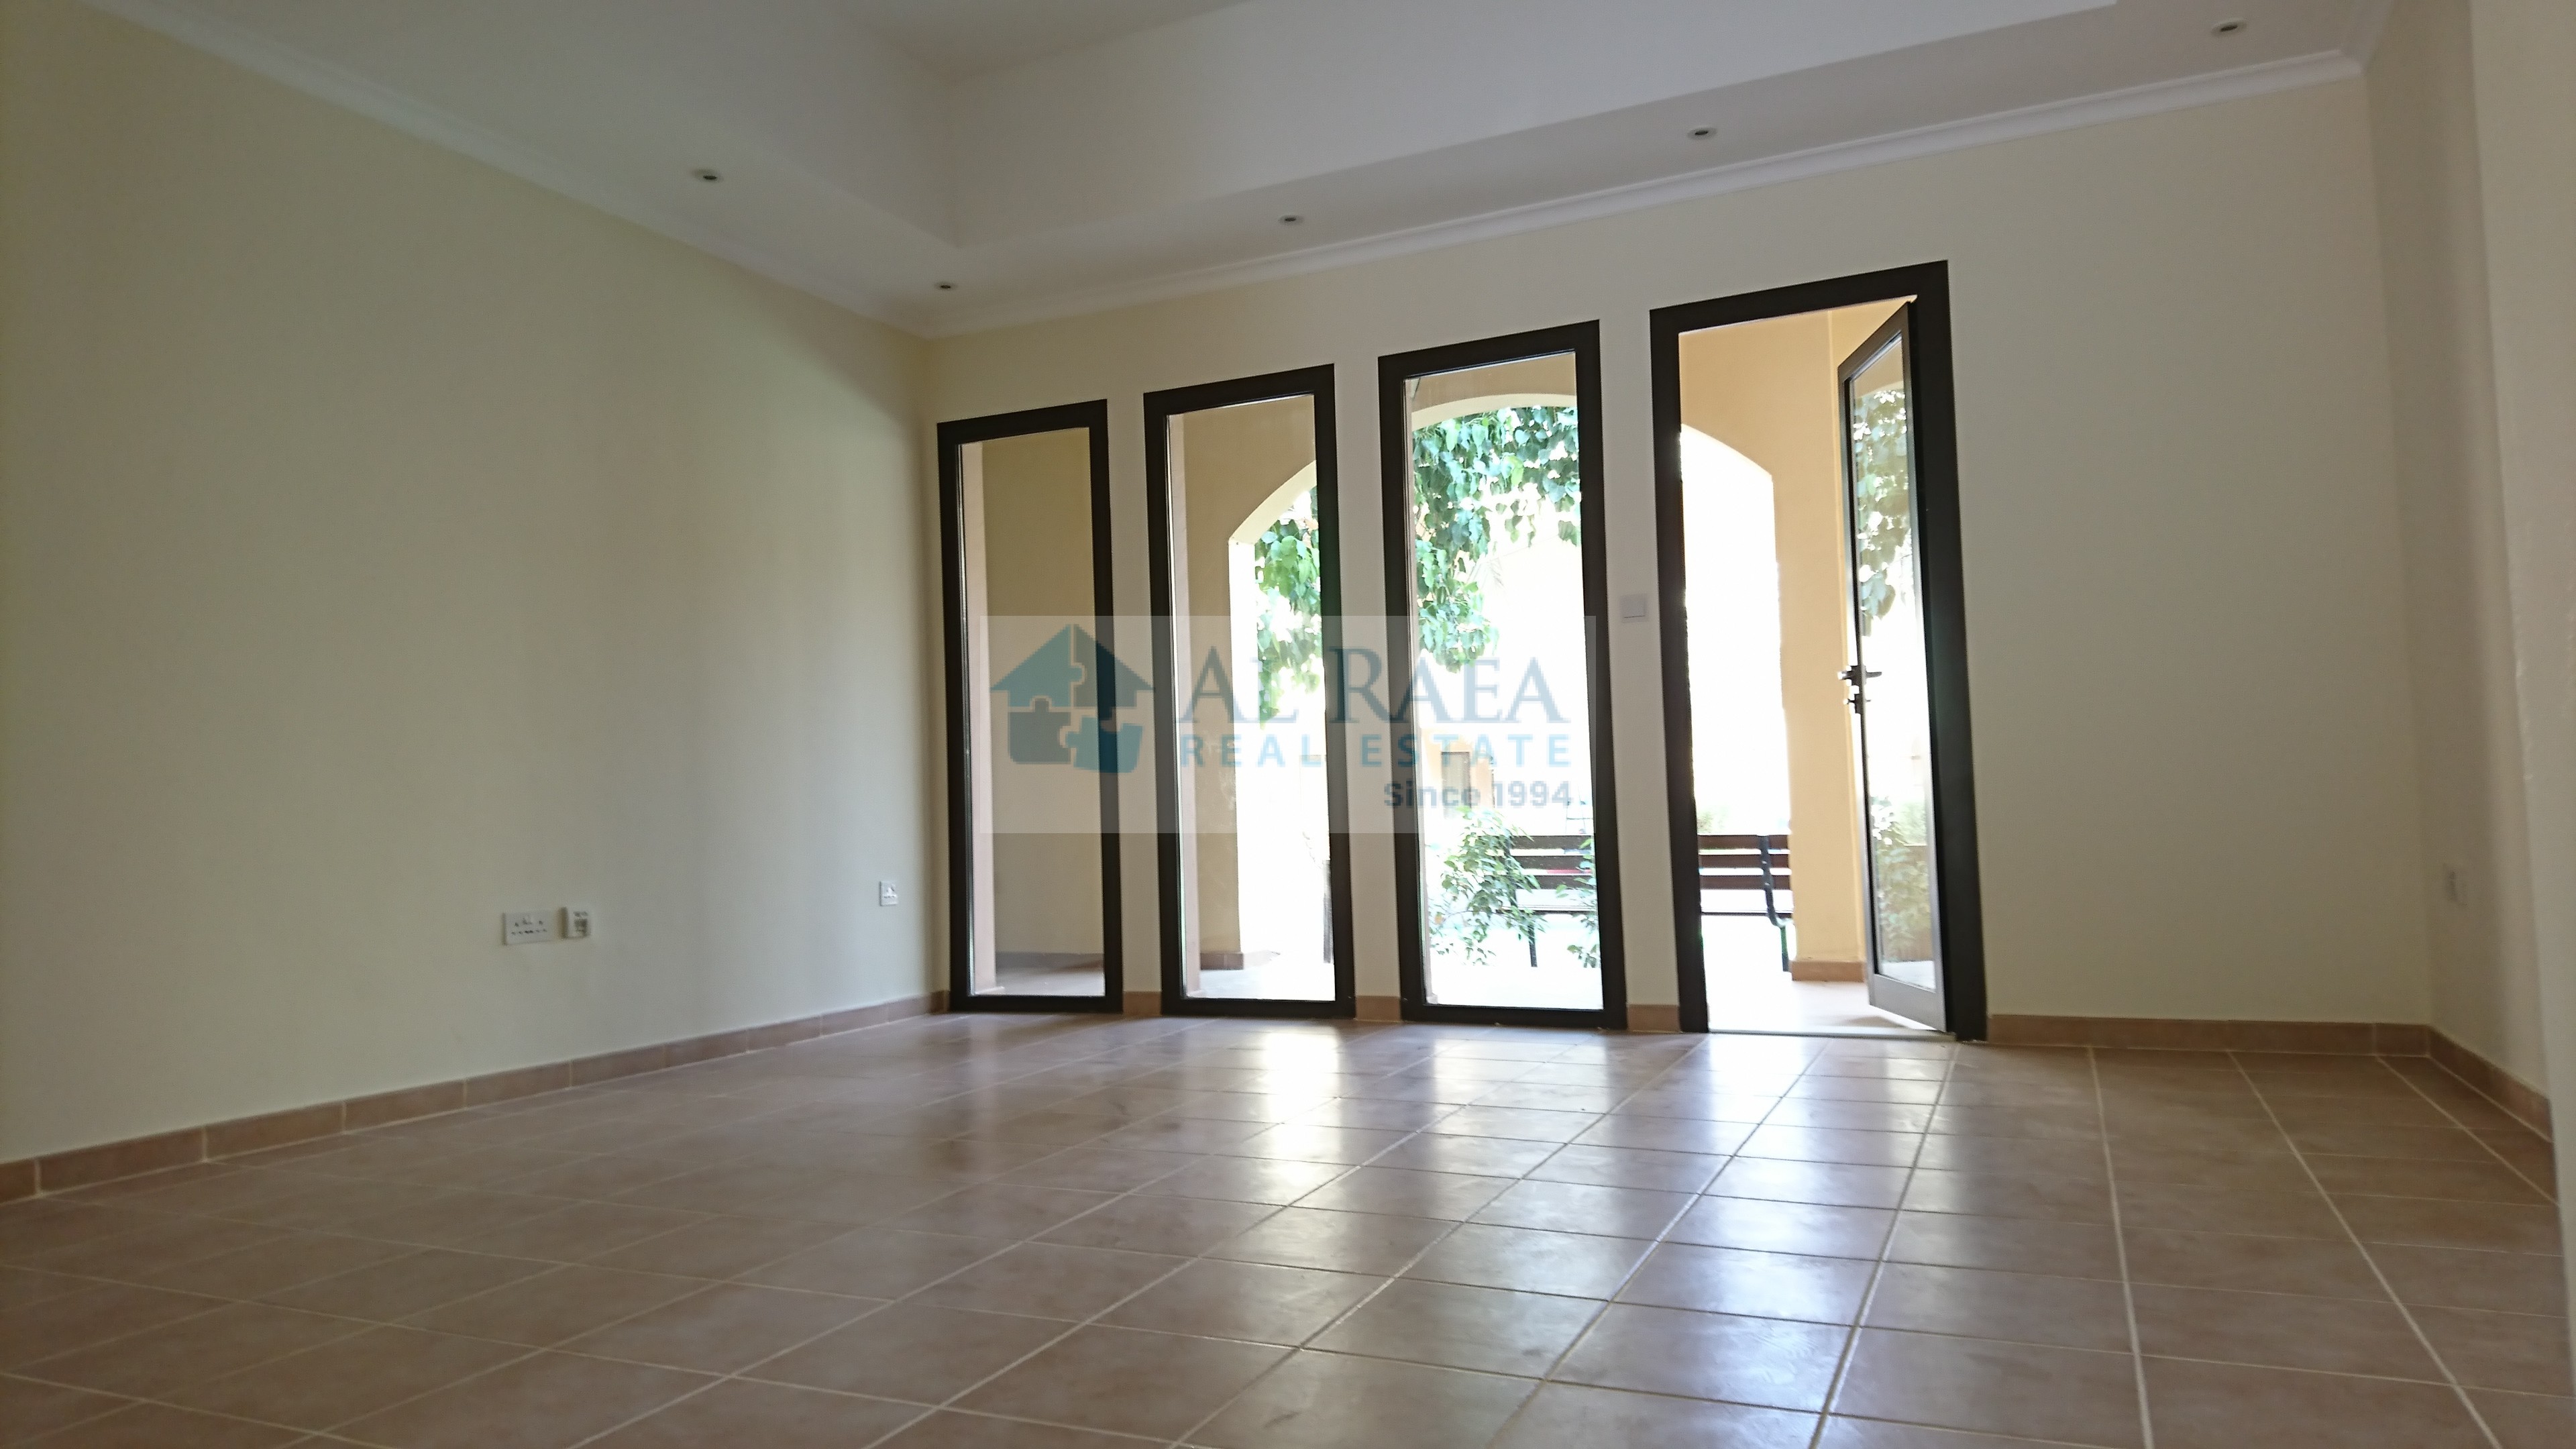 2BHK VILLA PAY IN 12 CHEQUES NO COMMISION.